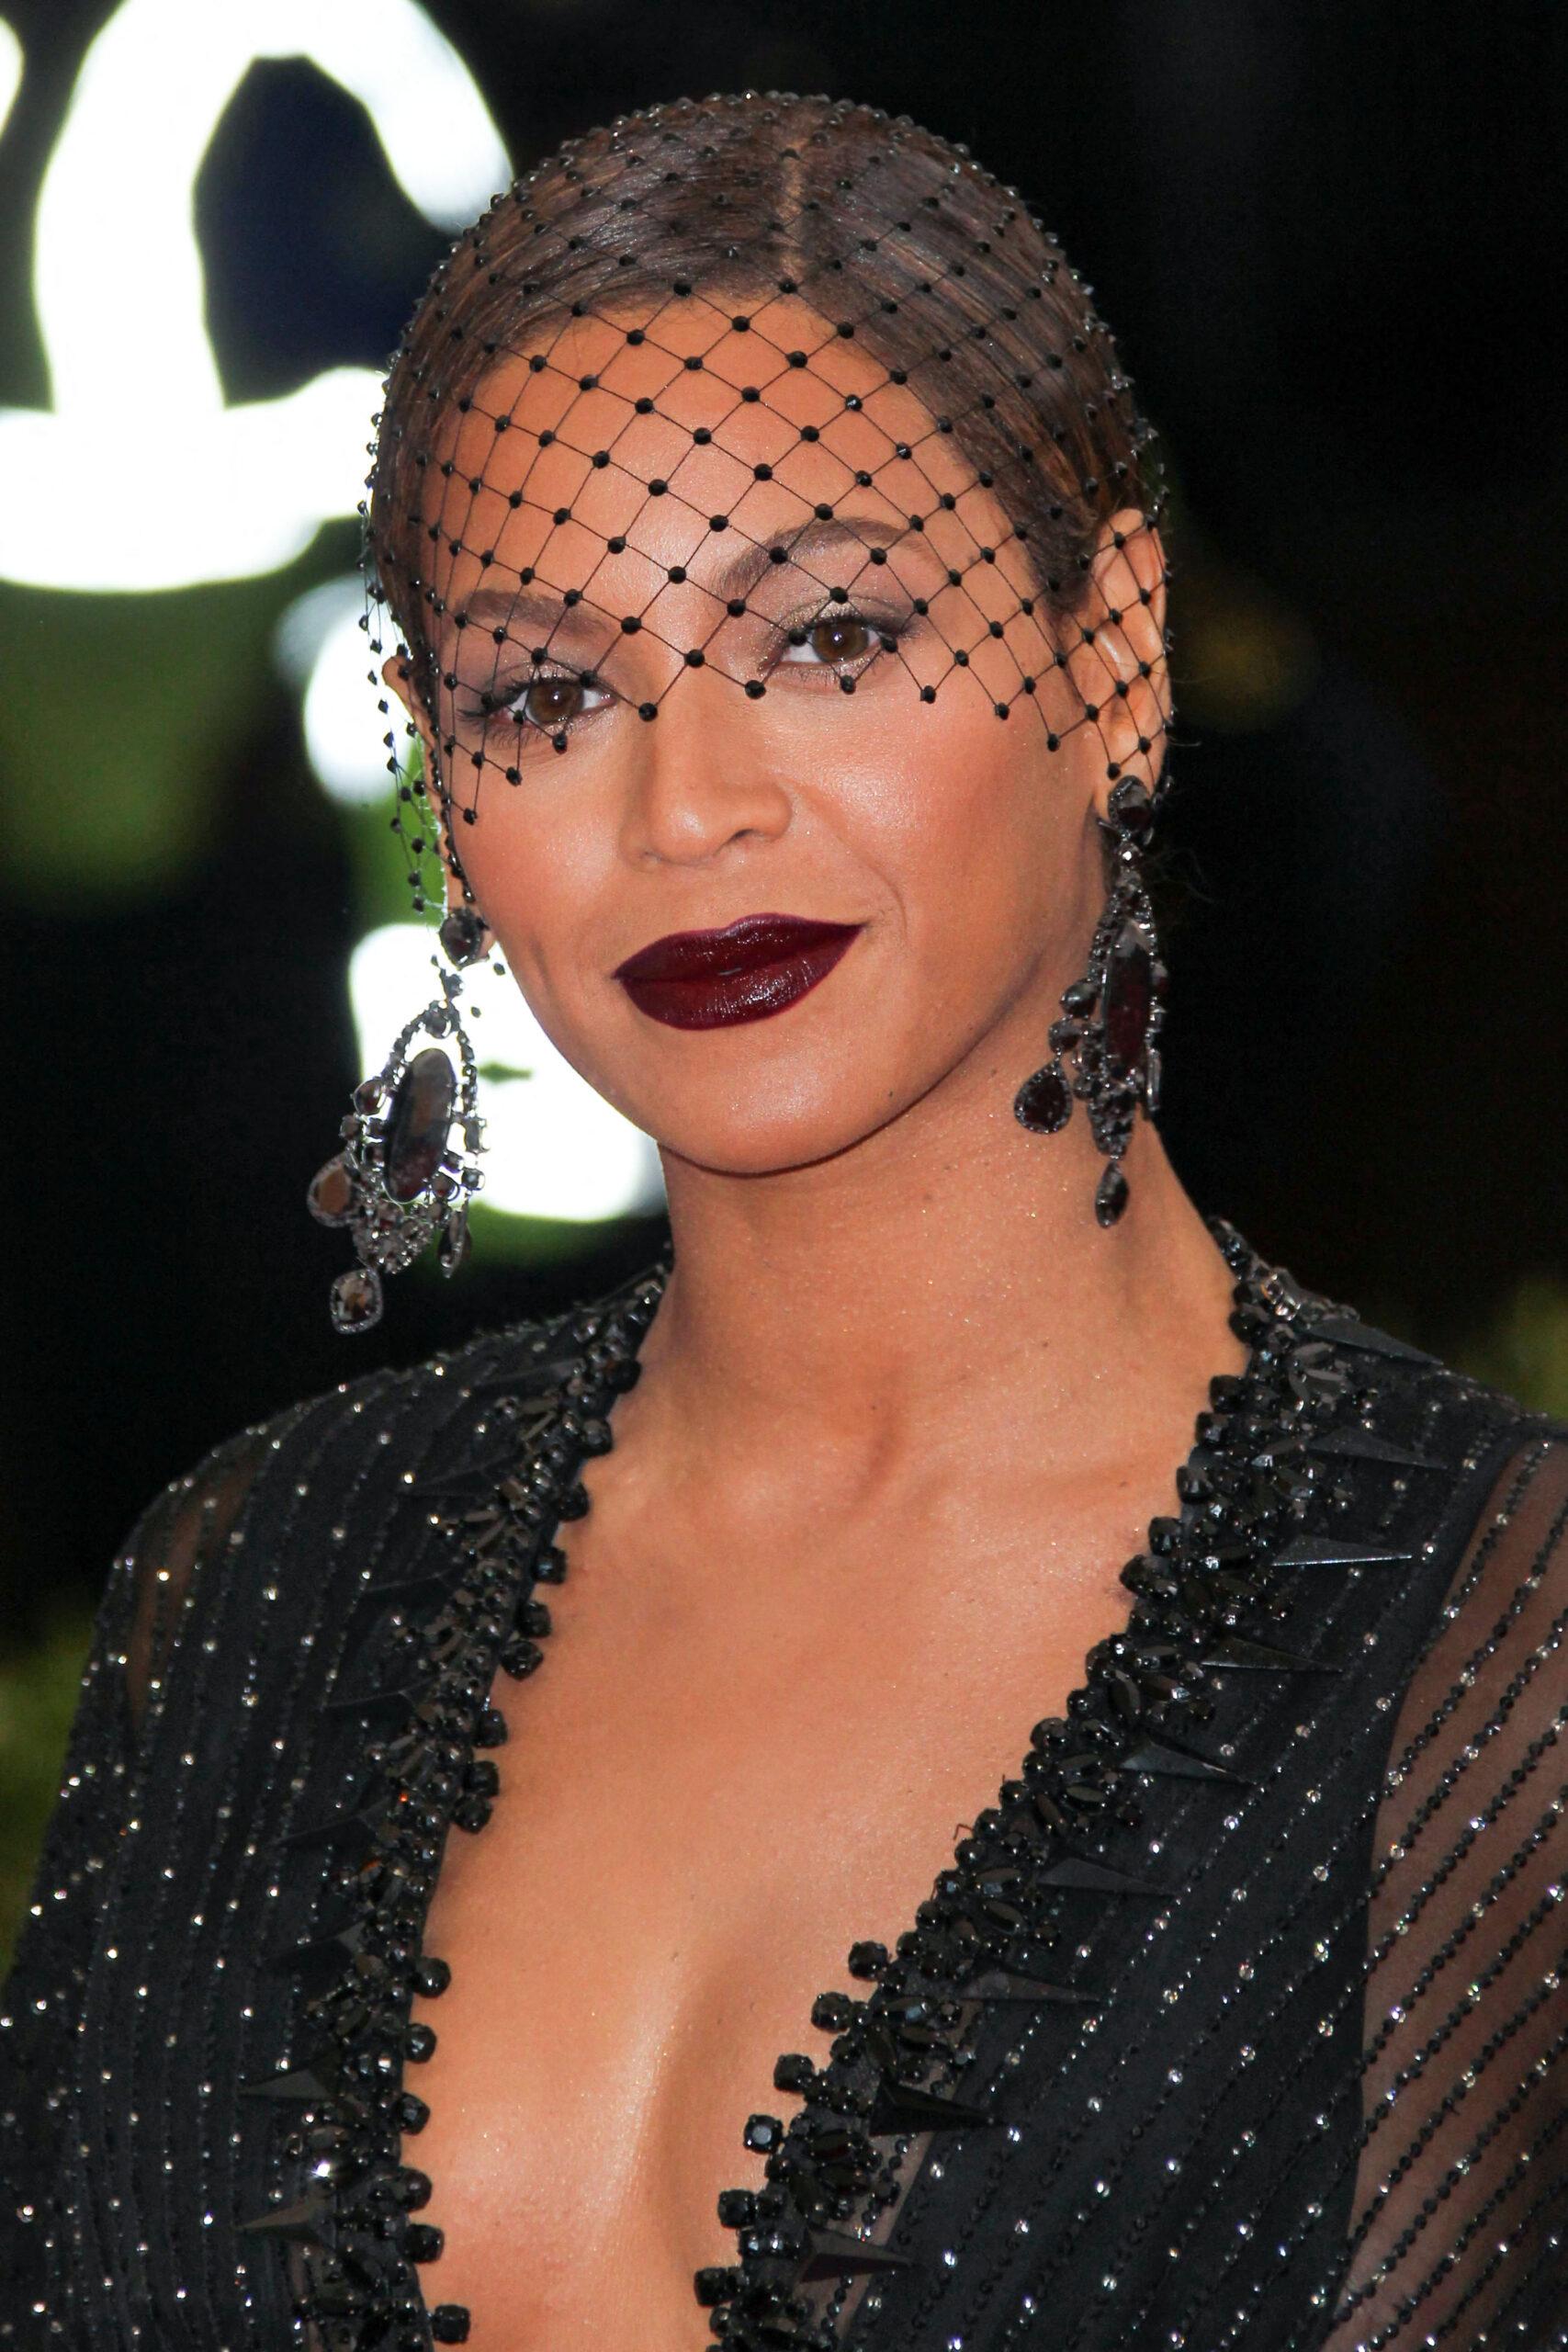 Beyoncé at the 'Charles James: Beyond Fashion' Costume Institute Gala held at the Metropolitan Museum of Art on May 5, 2014 in Manhattan, New York City